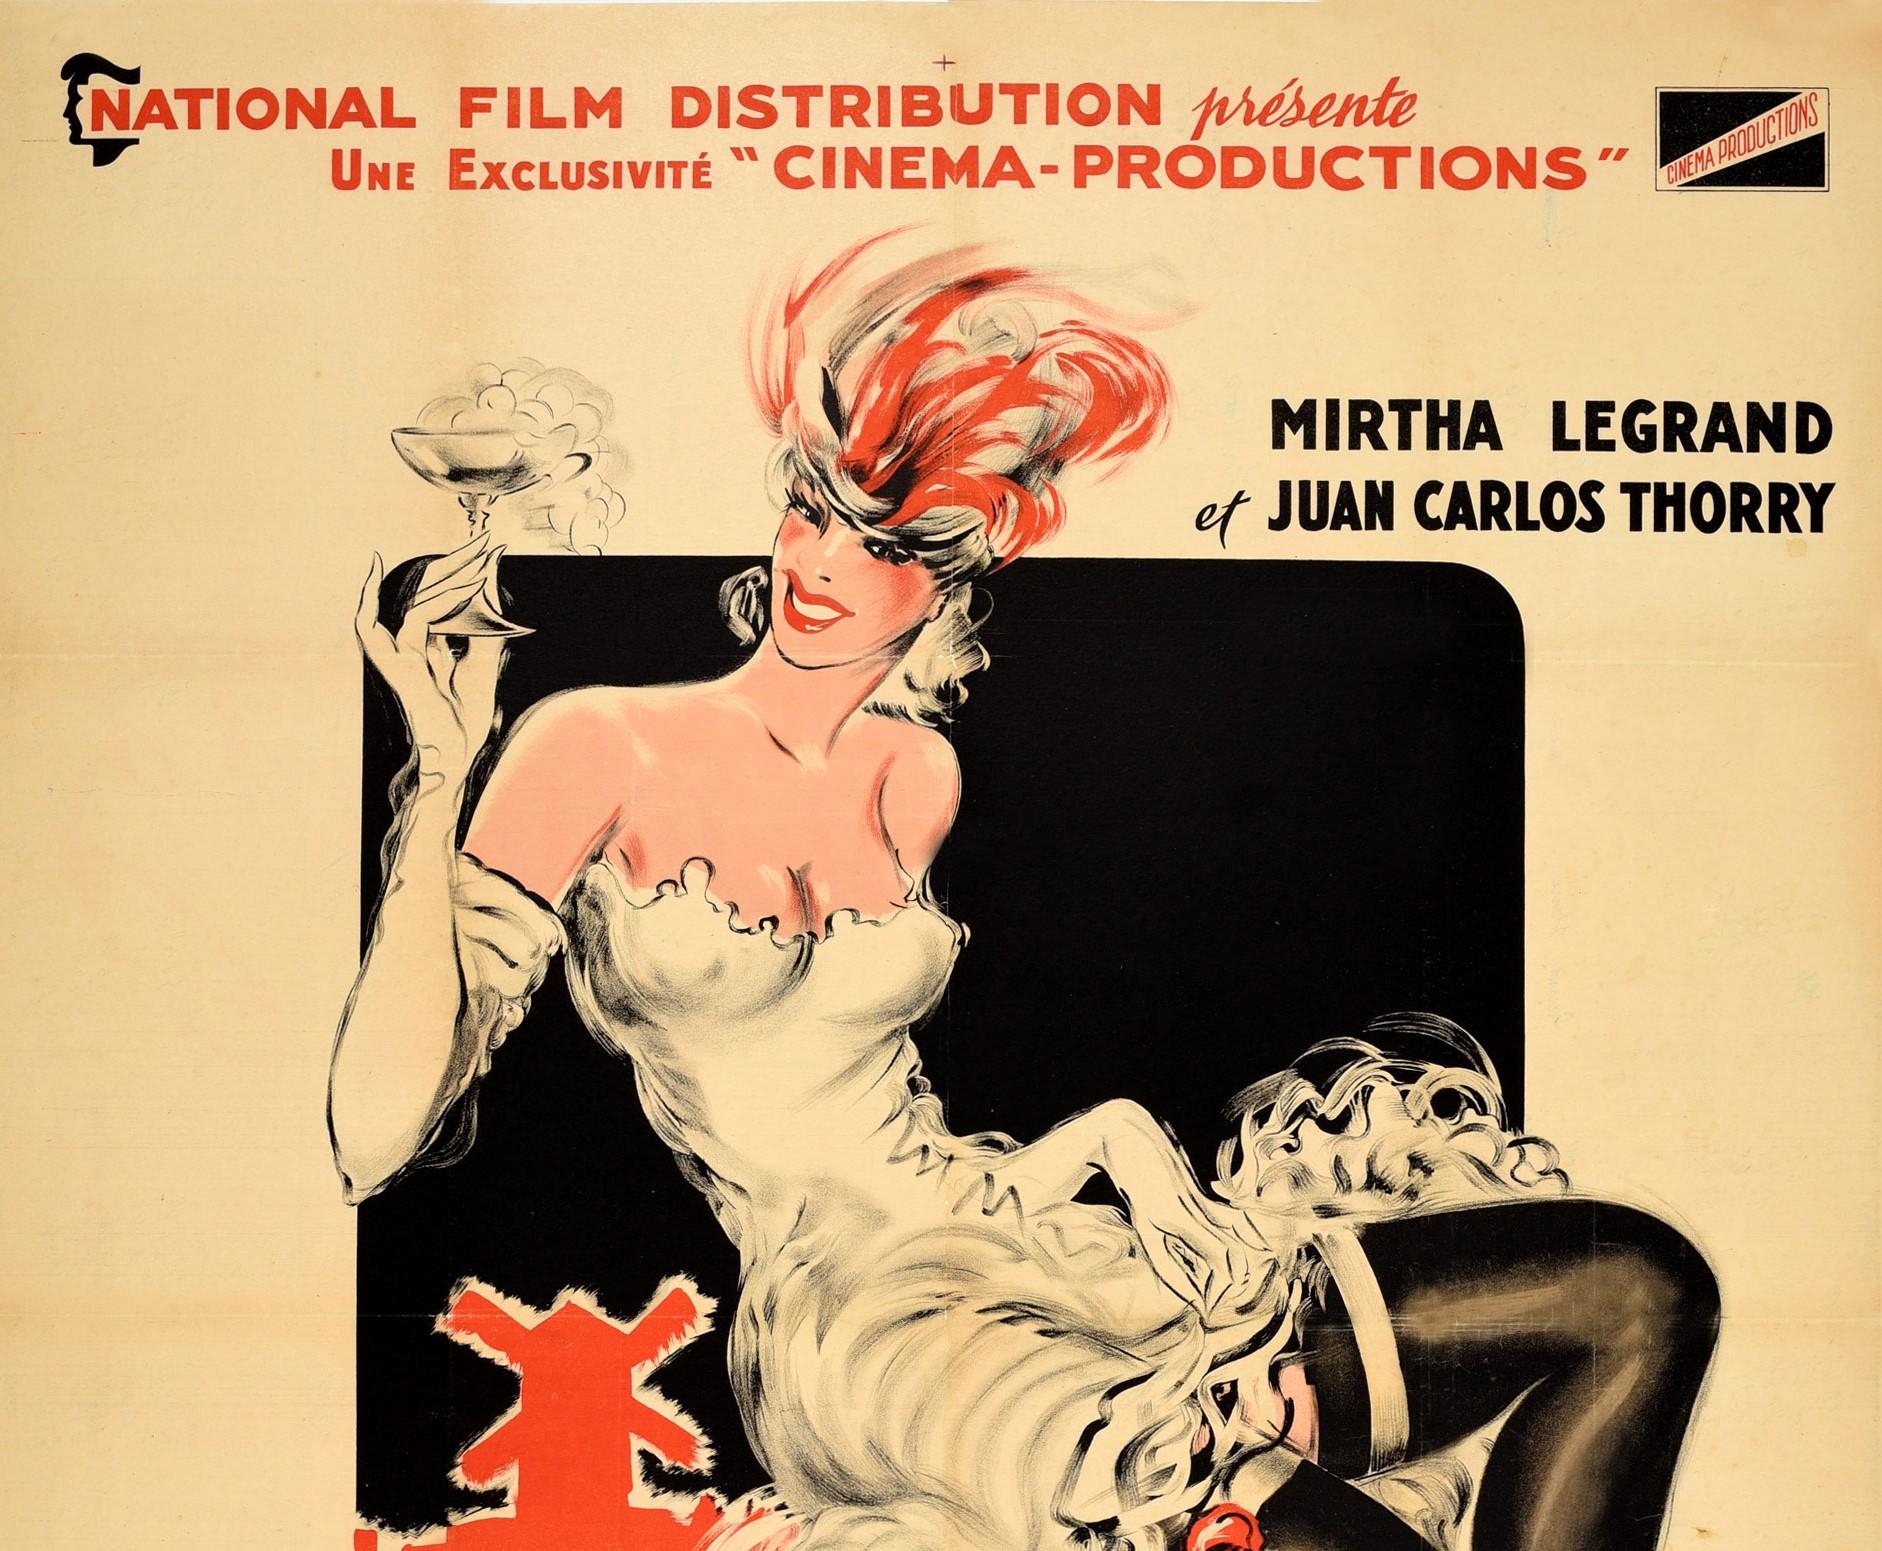 Original vintage movie poster for a musical comedy film La P'tite Femme du Moulin-Rouge featuring a great illustration by Vicente Cristellys (1898-1970) of a smiling lady wearing a white dress and gloves with red shoes and a feathered headdress